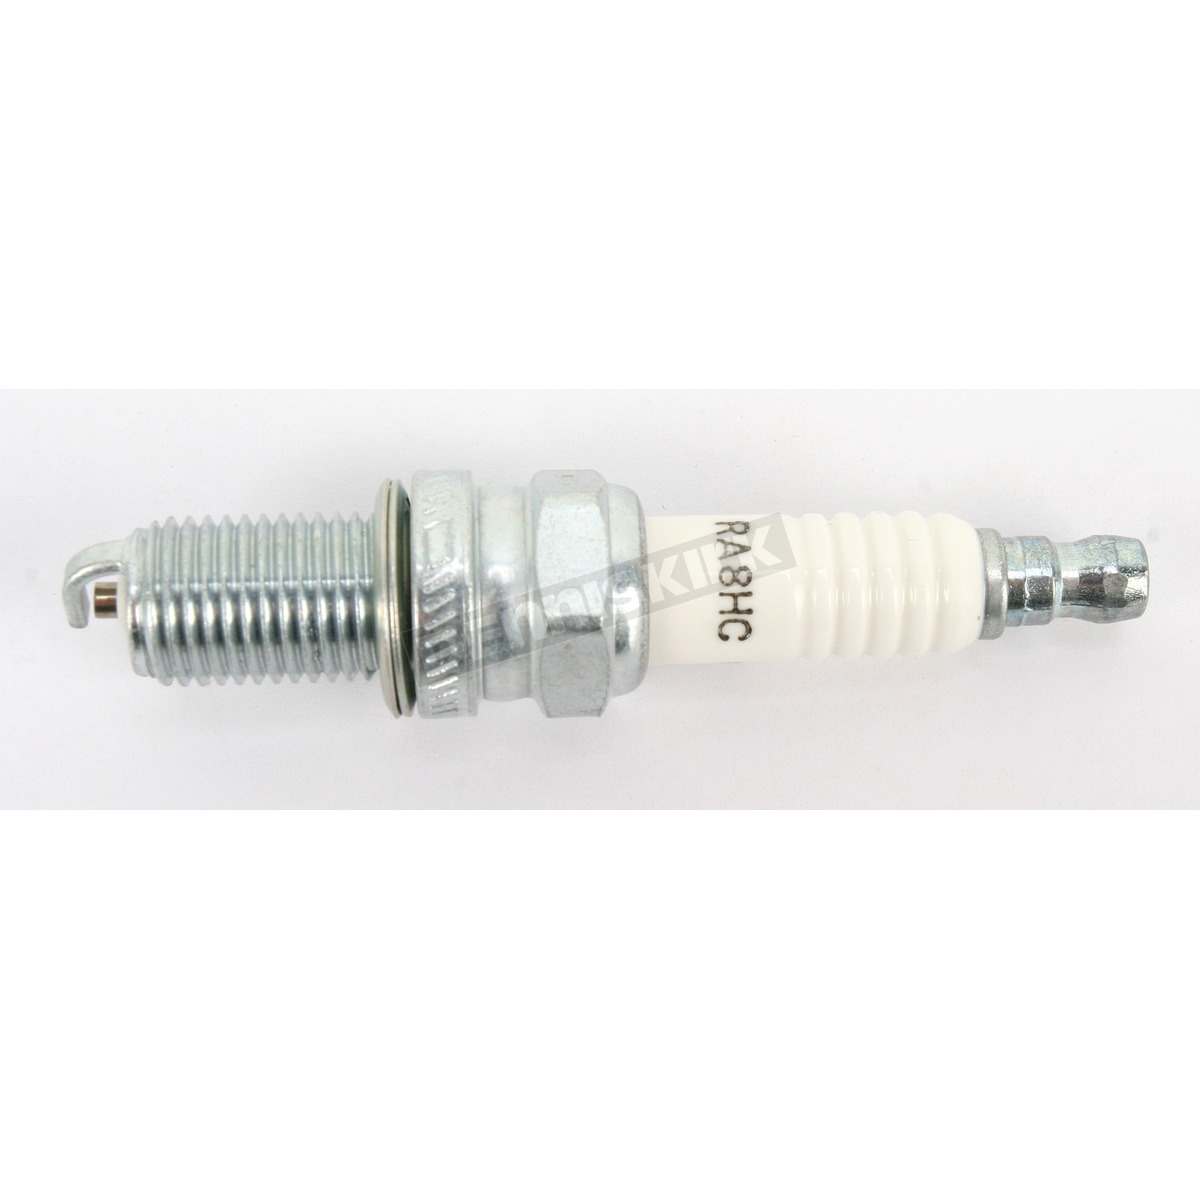 Best spark plugs for twin cam 88